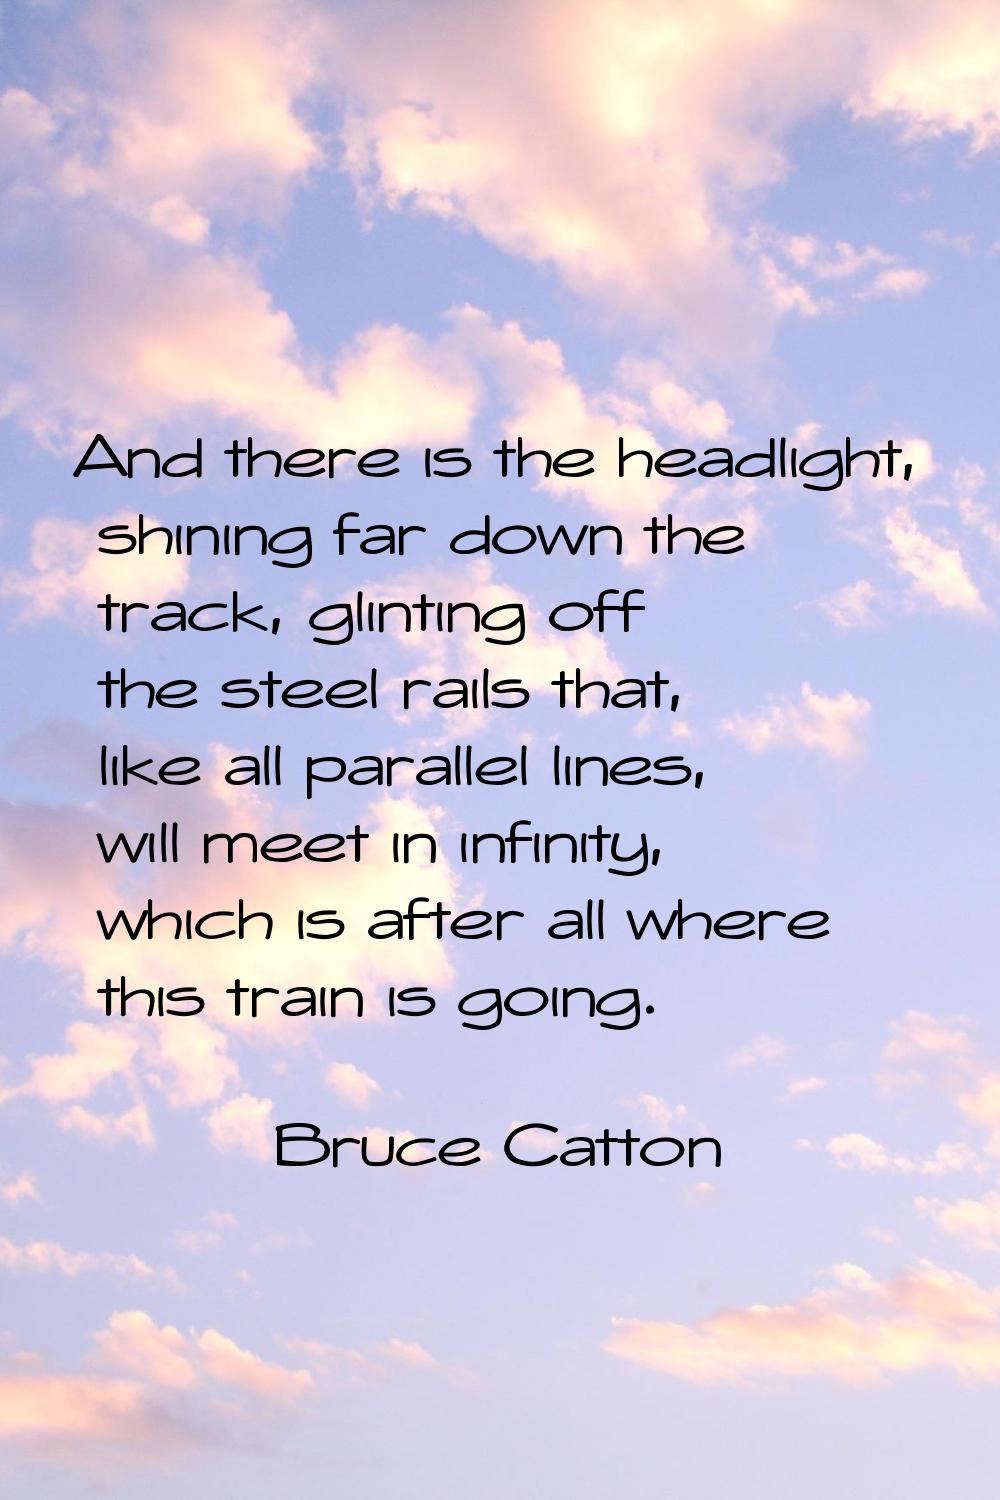 And there is the headlight, shining far down the track, glinting off the steel rails that, like all